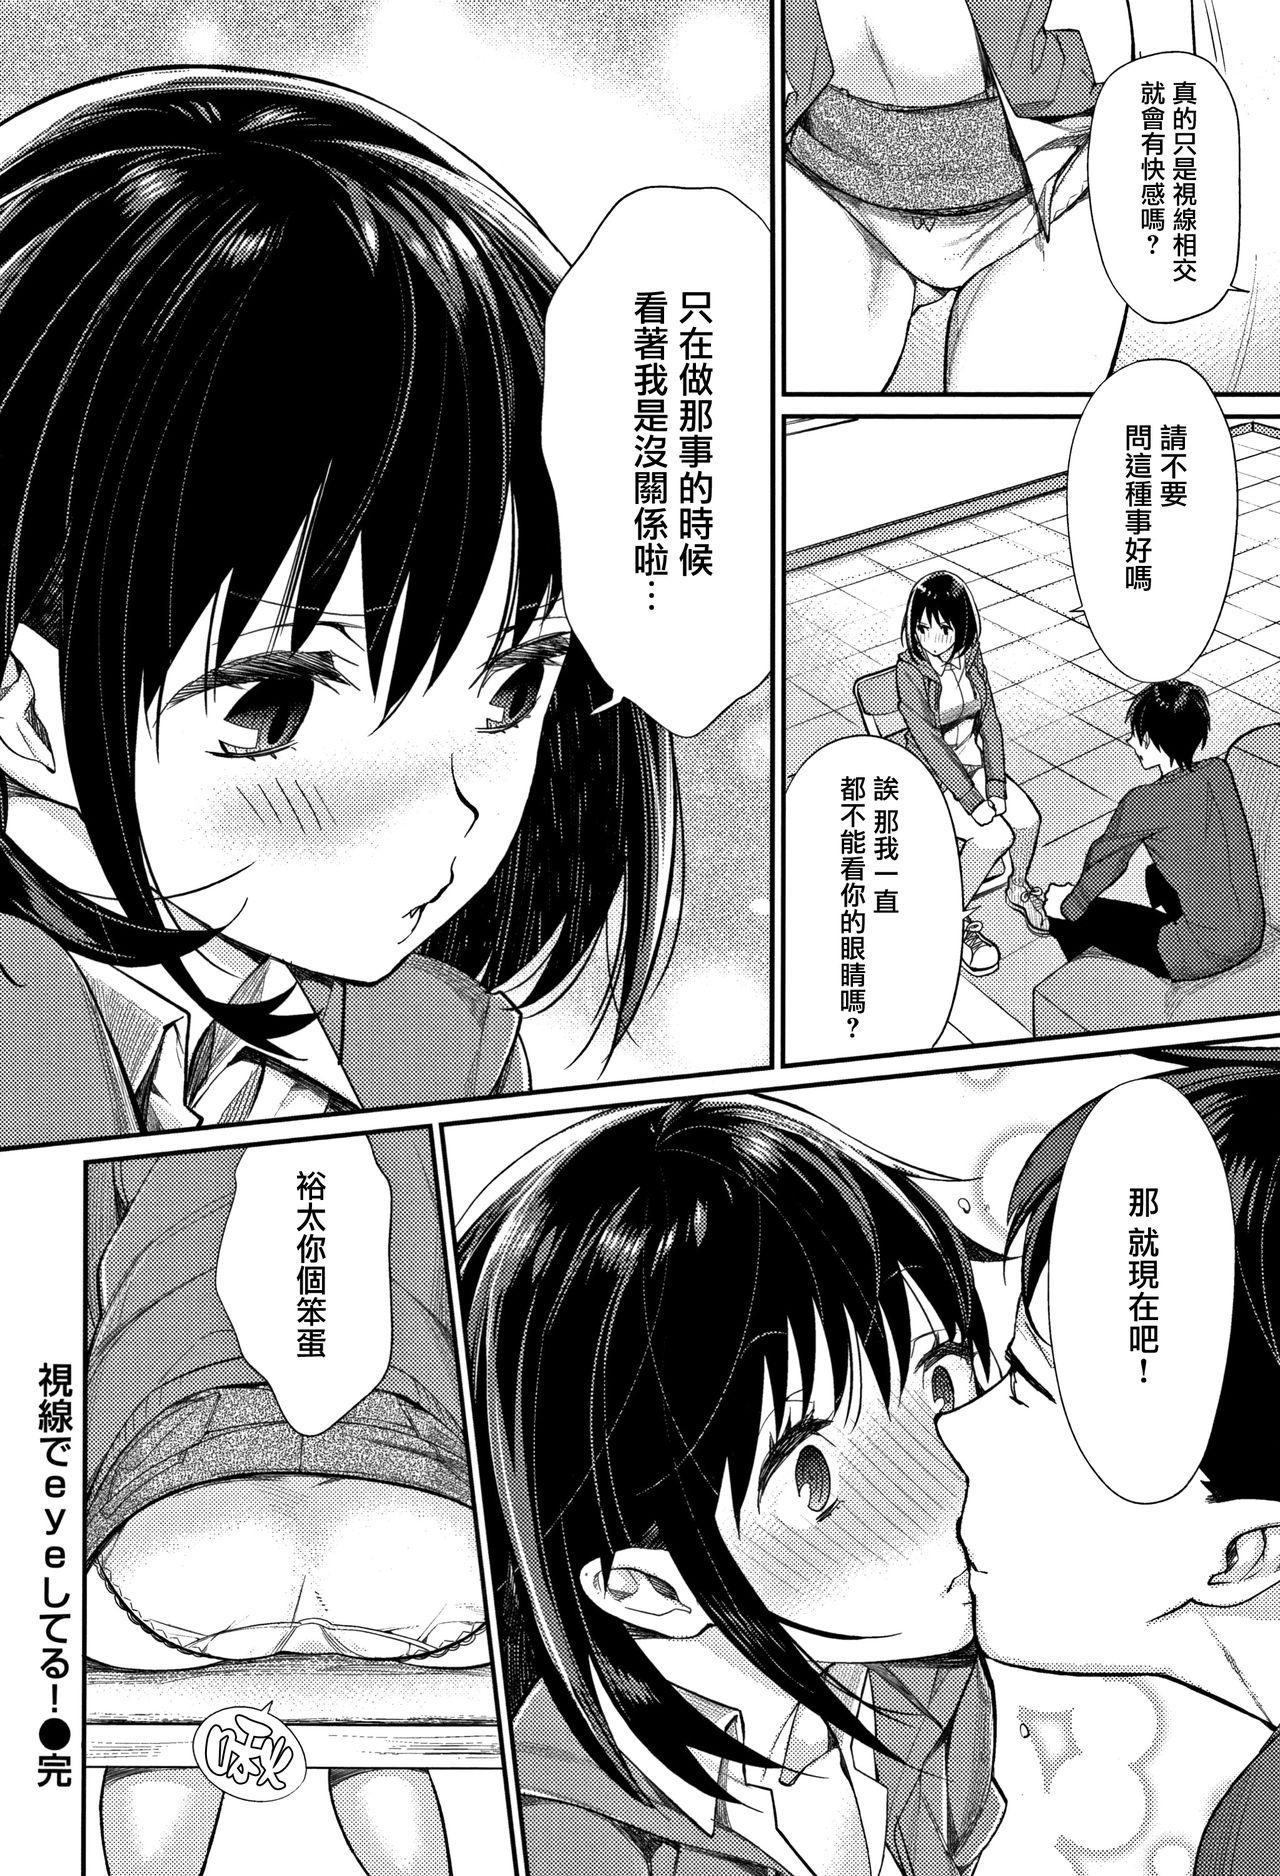 Sucking [MGMEE] Bokura no Etude - Our H Chu Do Ch.1-7 [Chinese] [無邪気漢化組] Best Blowjobs Ever - Page 178